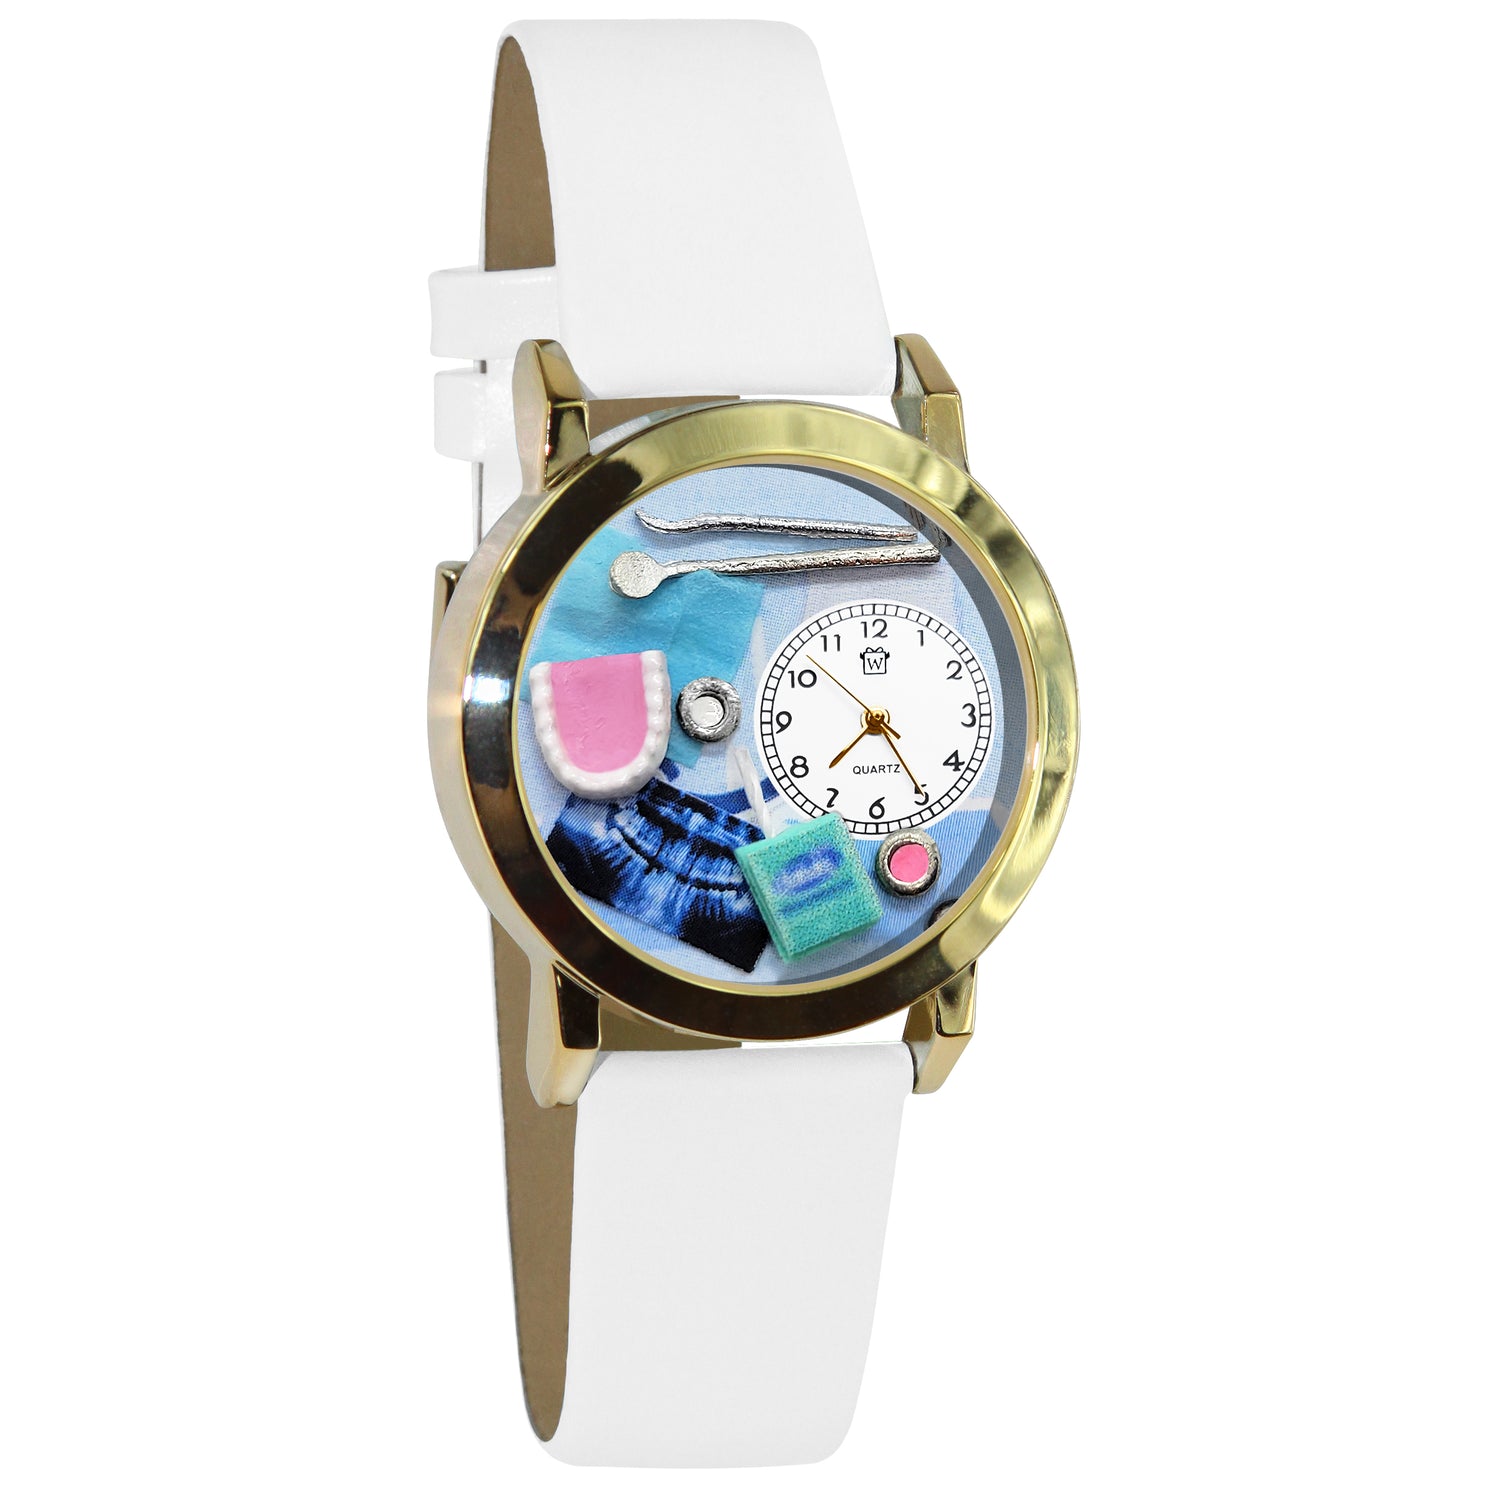 Whimsical Gifts | Dentist Dental Hygienist 3D Watch Small Style | Handmade in USA | Professions Themed | Dental Professions | Novelty Unique Fun Miniatures Gift | Gold Finish White Leather Watch Band